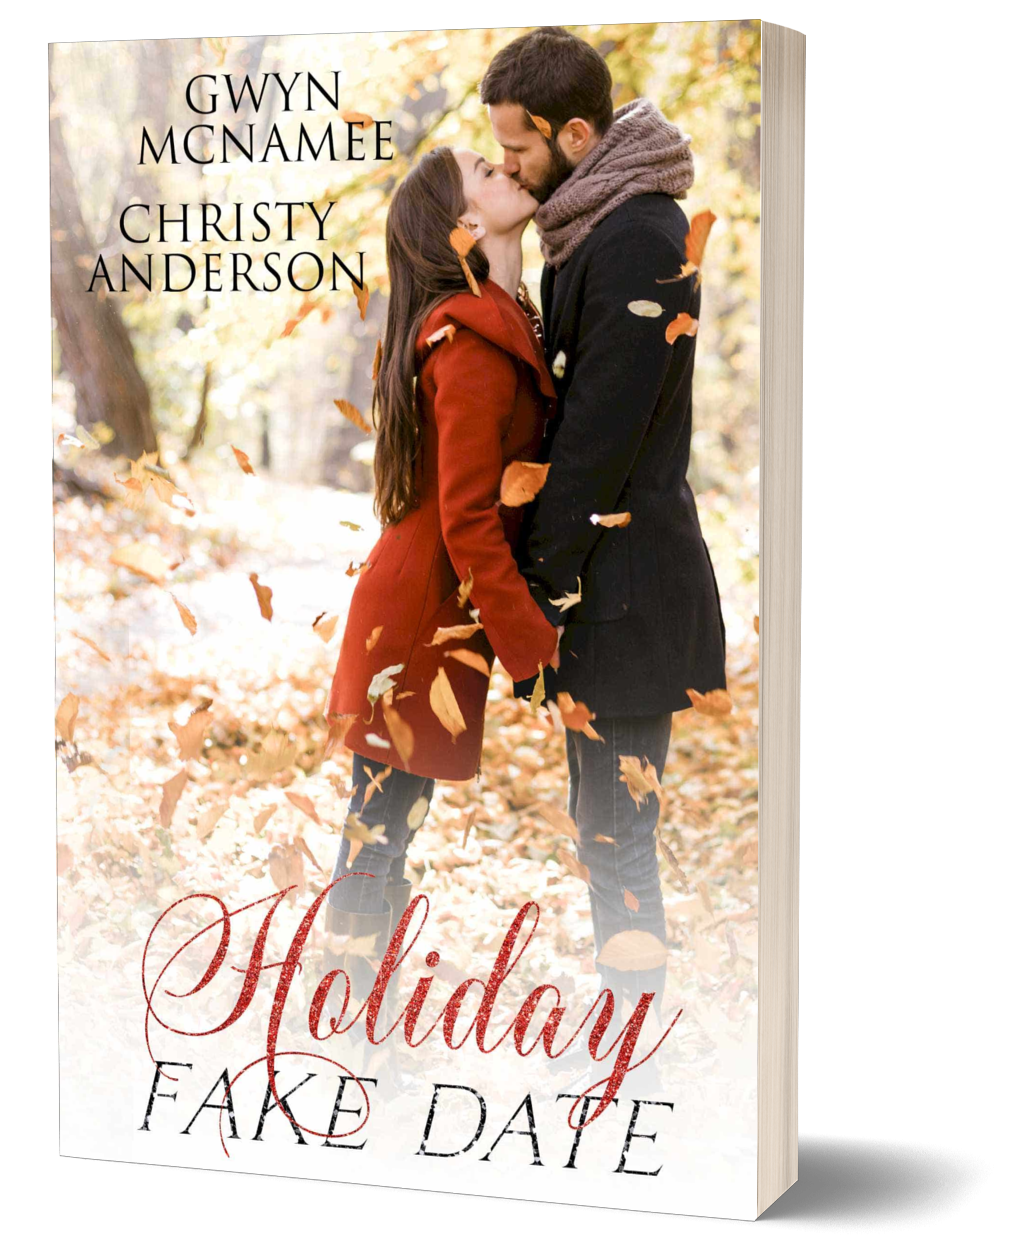 Holiday Fake Date Signed Paperback